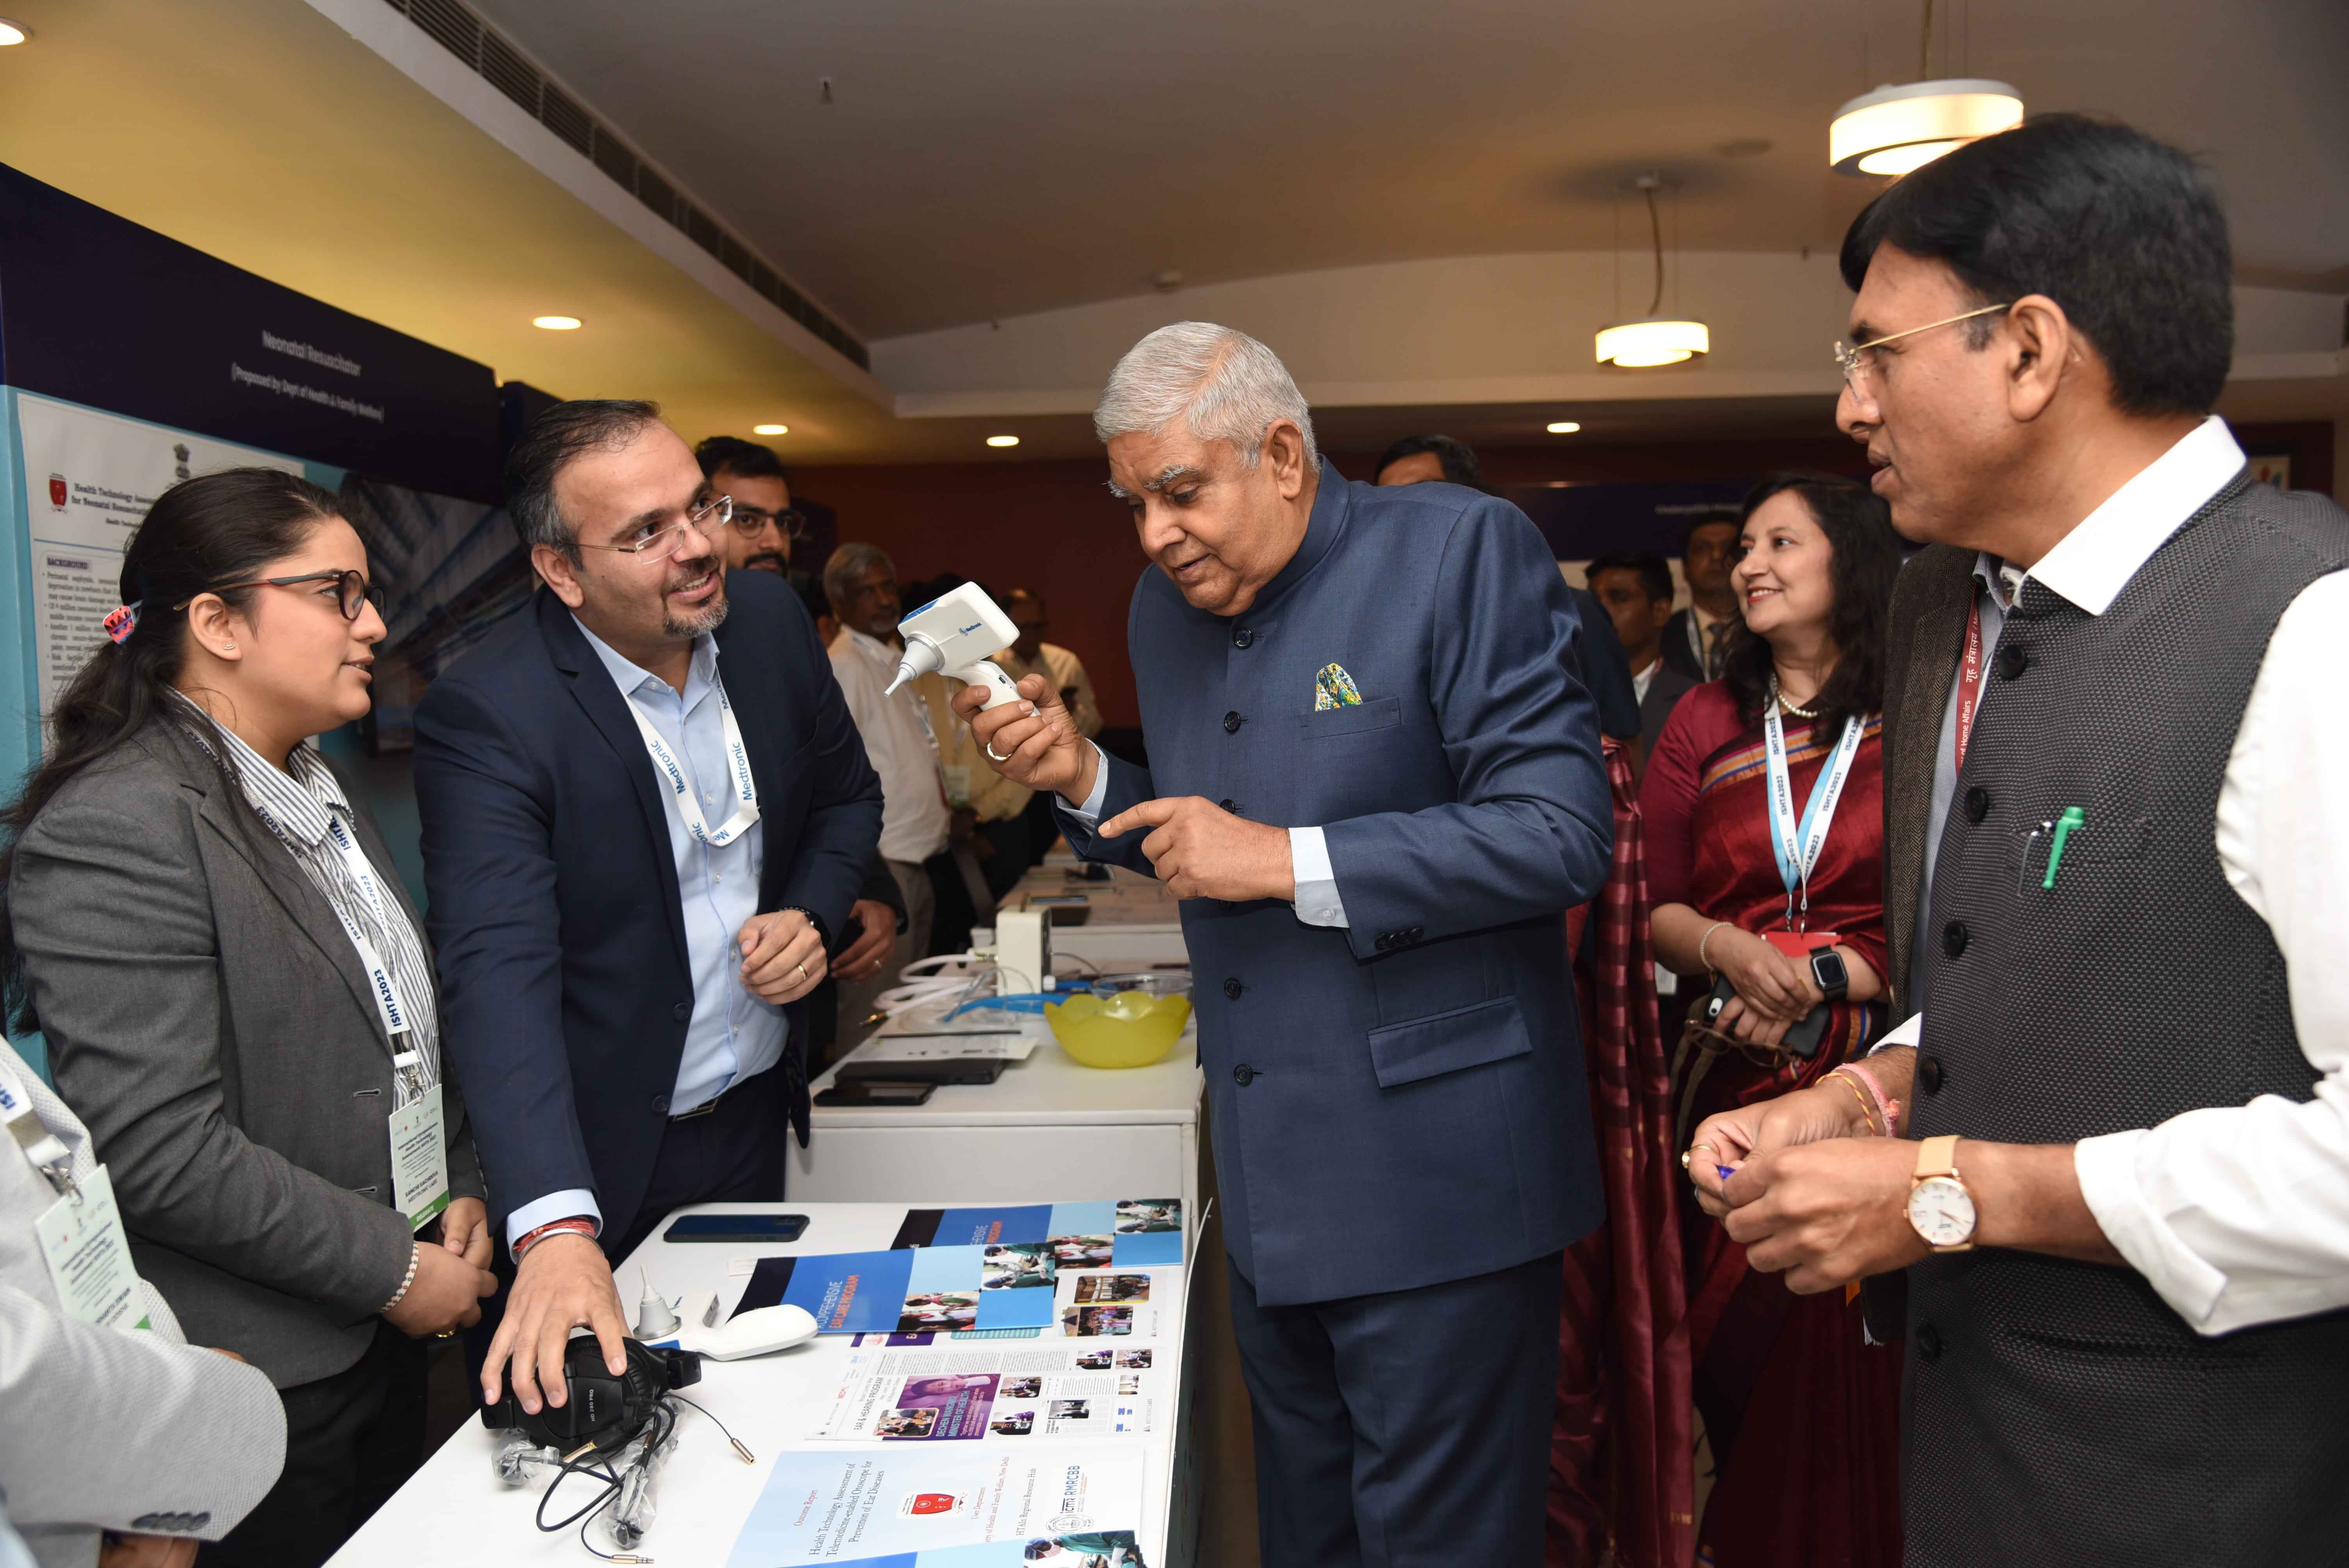 The Vice President, Shri Jagdeep Dhankhar, along with Union Minister  Dr Mansukh Mandaviya visiting 'Market Place' at the International Symposium on Health Technology Assessment - 2023 in New Delhi on March 10, 2023.